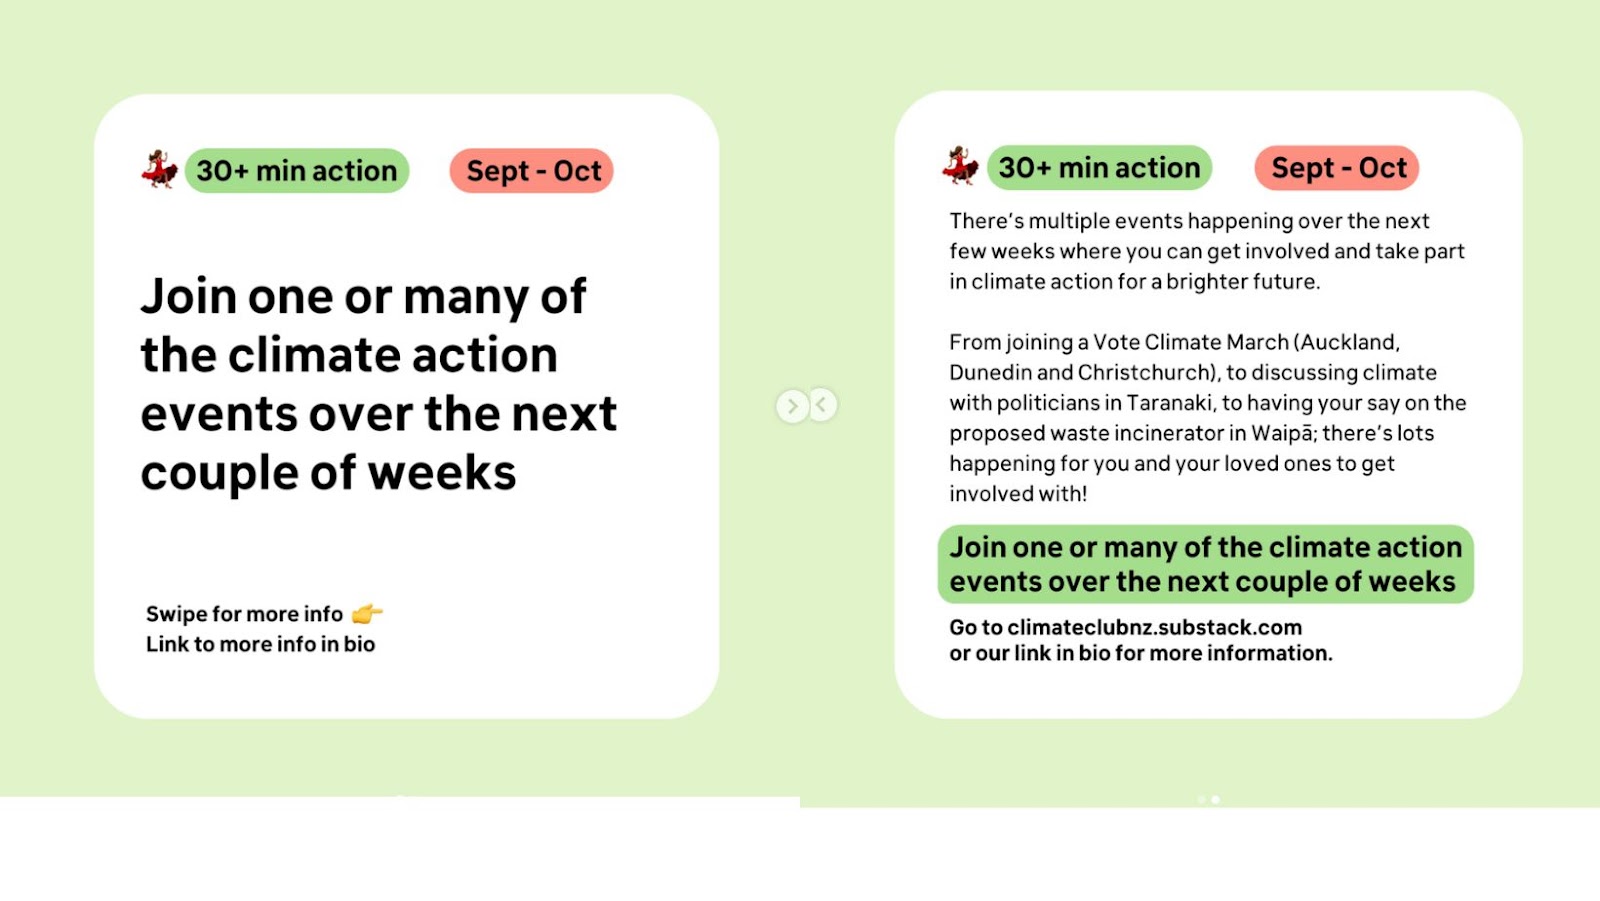 Two text macros for instagram, for a 30 minute action: Join one of many of the climate action events over the next couple of weeks